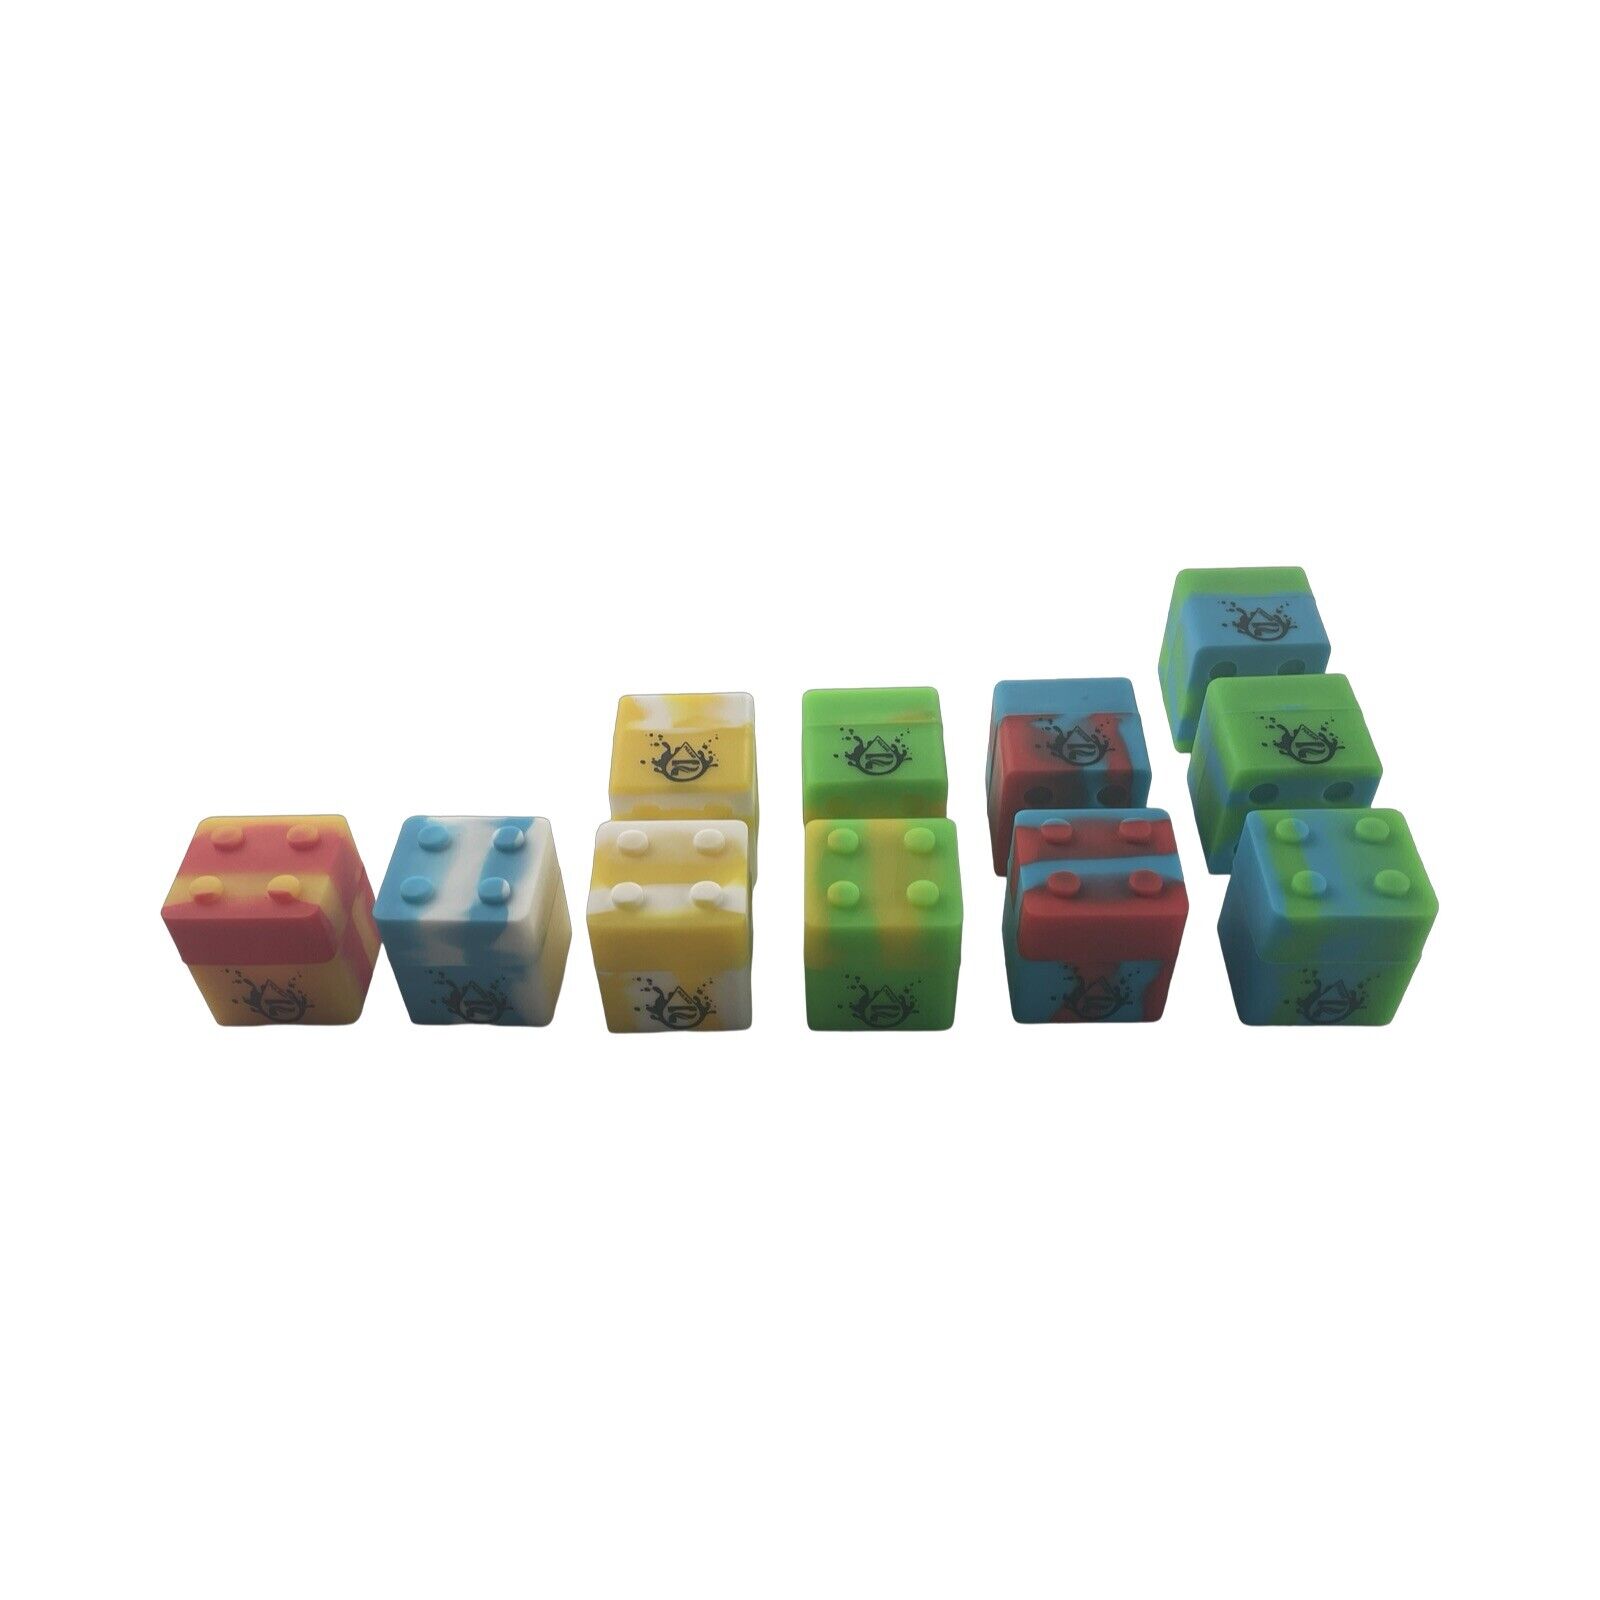 Pulsar Silicone Stackable Storage Containers 9ml (Lot of 11 Cubes)